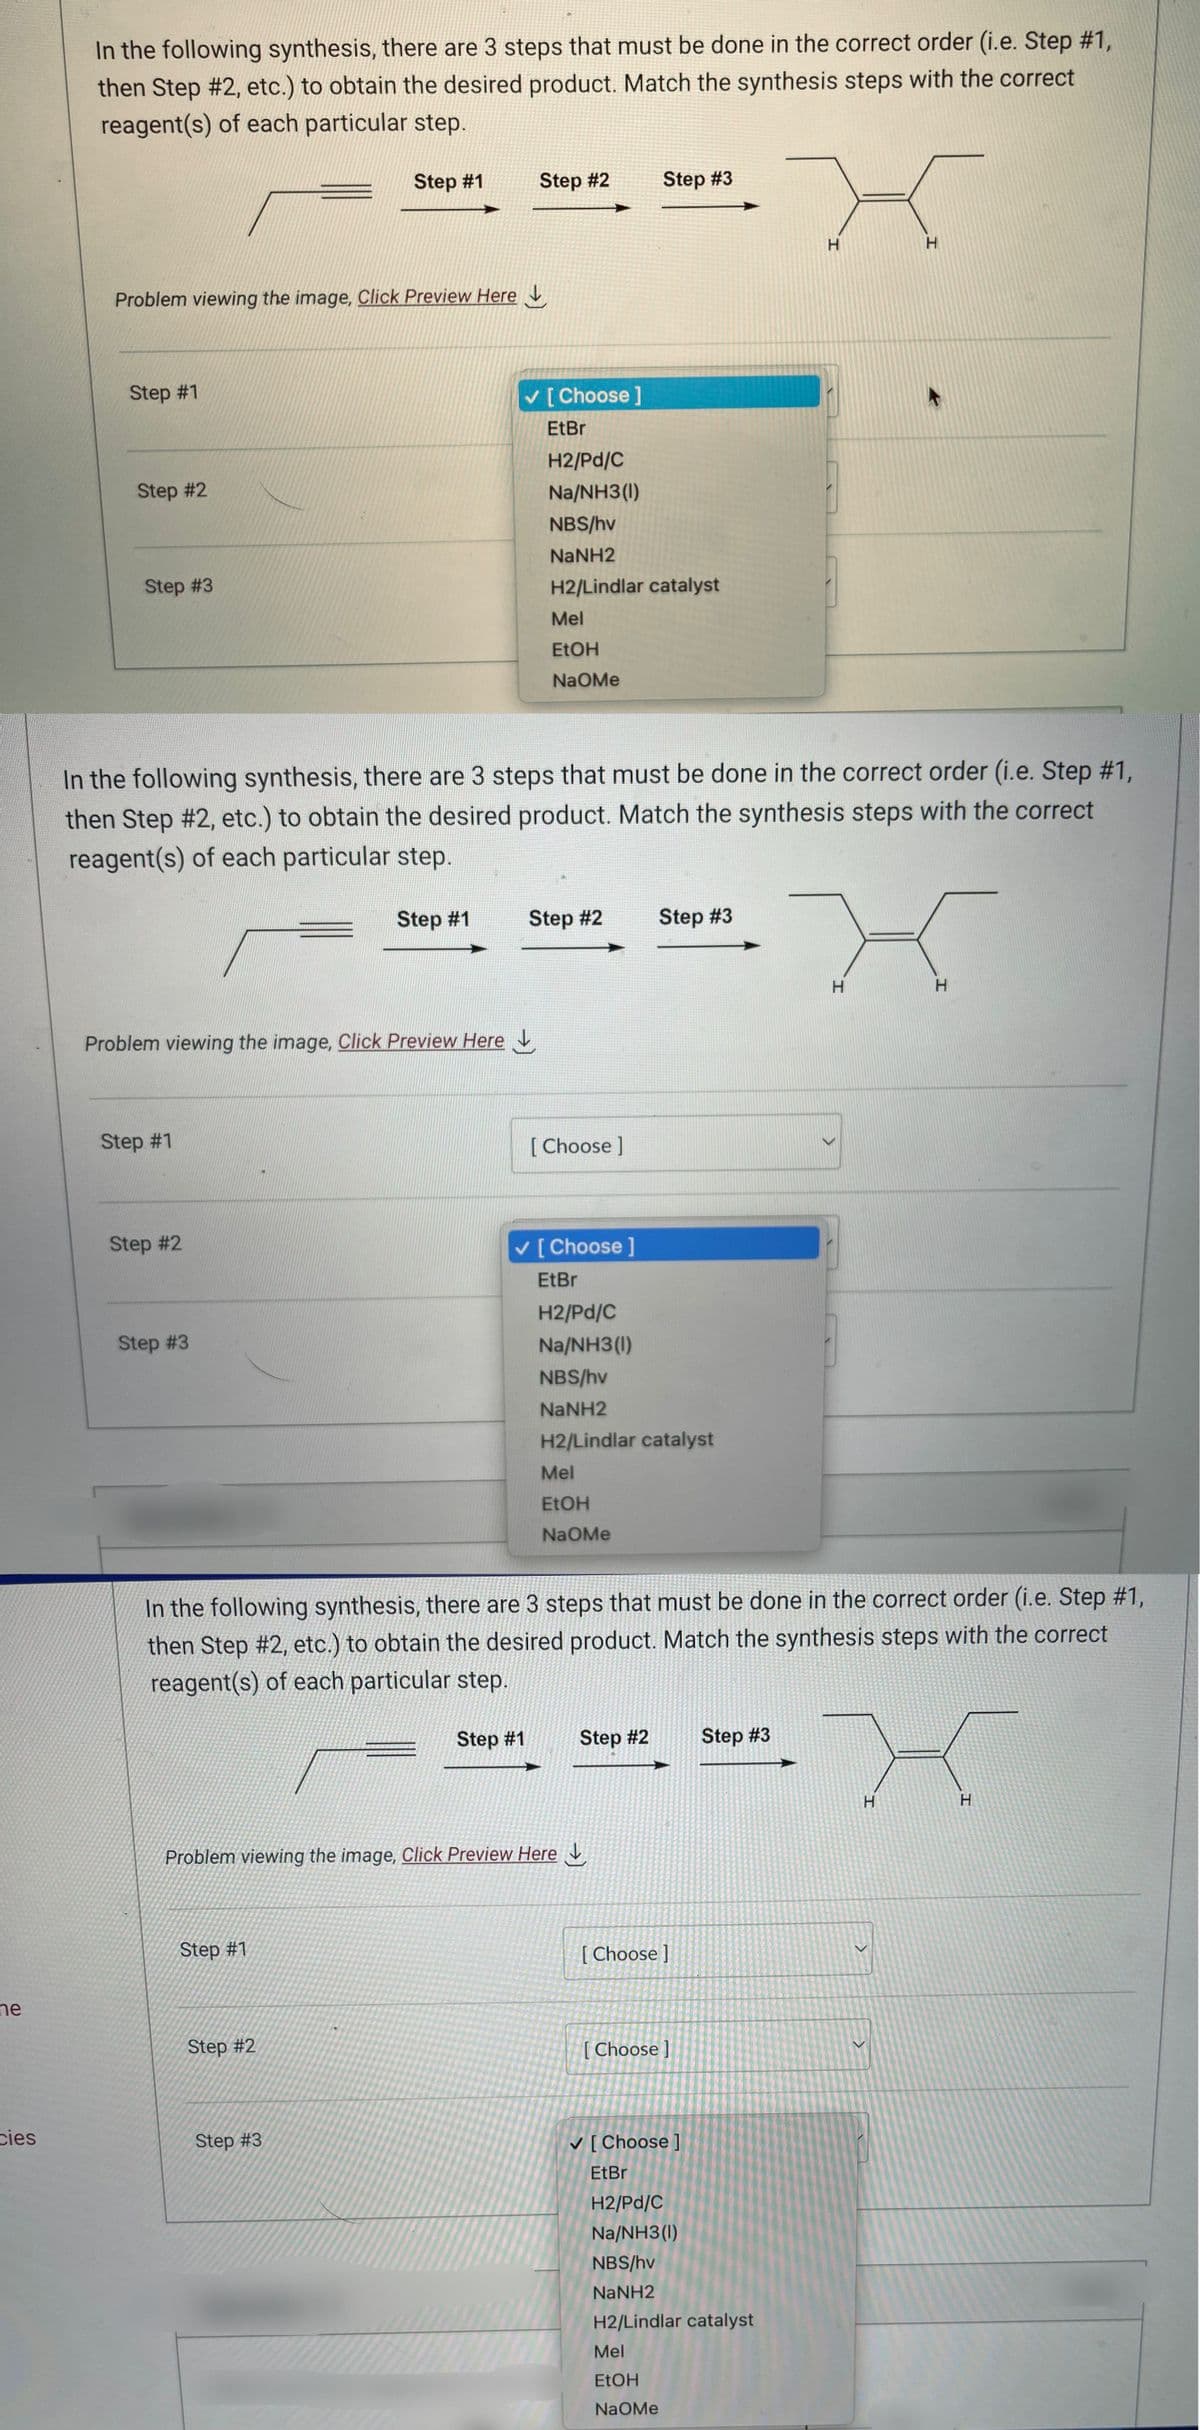 ne
cies
In the following synthesis, there are 3 steps that must be done in the correct order (i.e. Step #1,
then Step #2, etc.) to obtain the desired product. Match the synthesis steps with the correct
reagent(s) of each particular step.
Problem viewing the image. Click Preview Here
Step #1
Step #2
Step #3
Step #1
Problem viewing the image. Click Preview Here
Step #2
Step #3
Step #1
In the following synthesis, there are 3 steps that must be done in the correct order (i.e. Step #1,
then Step #2, etc.) to obtain the desired product. Match the synthesis steps with the correct
reagent(s) of each particular step.
Step #1
Step #1
Step #2
Step #3
Step #2
Step #1
✓ [Choose ]
EtBr
H2/Pd/C
Na/NH3 (1)
NBS/hv
NaNH2
H2/Lindlar catalyst
Mel
EtOH
NaOMe
Step #2
[Choose ]
Problem viewing the image. Click Preview Here
Mel
EtOH
NaOMe
Step #3
[Choose ]
EtBr
H2/Pd/C
Na/NH3(1)
NBS/hv
NaNH2
H2/Lindlar catalyst
In the following synthesis, there are 3 steps that must be done in the correct order (i.e. Step #1,
then Step #2, etc.) to obtain the desired product. Match the synthesis steps with the correct
reagent(s) of each particular step.
Step #2
Step #3
[Choose ]
[Choose]
Mel
EtOH
NaOMe
H
Step #3
✓ [Choose ]
EtBr
H2/Pd/C
Na/NH3(1)
NBS/hv
NaNH2
H2/Lindlar catalyst
H
H
H
<
>
H
H